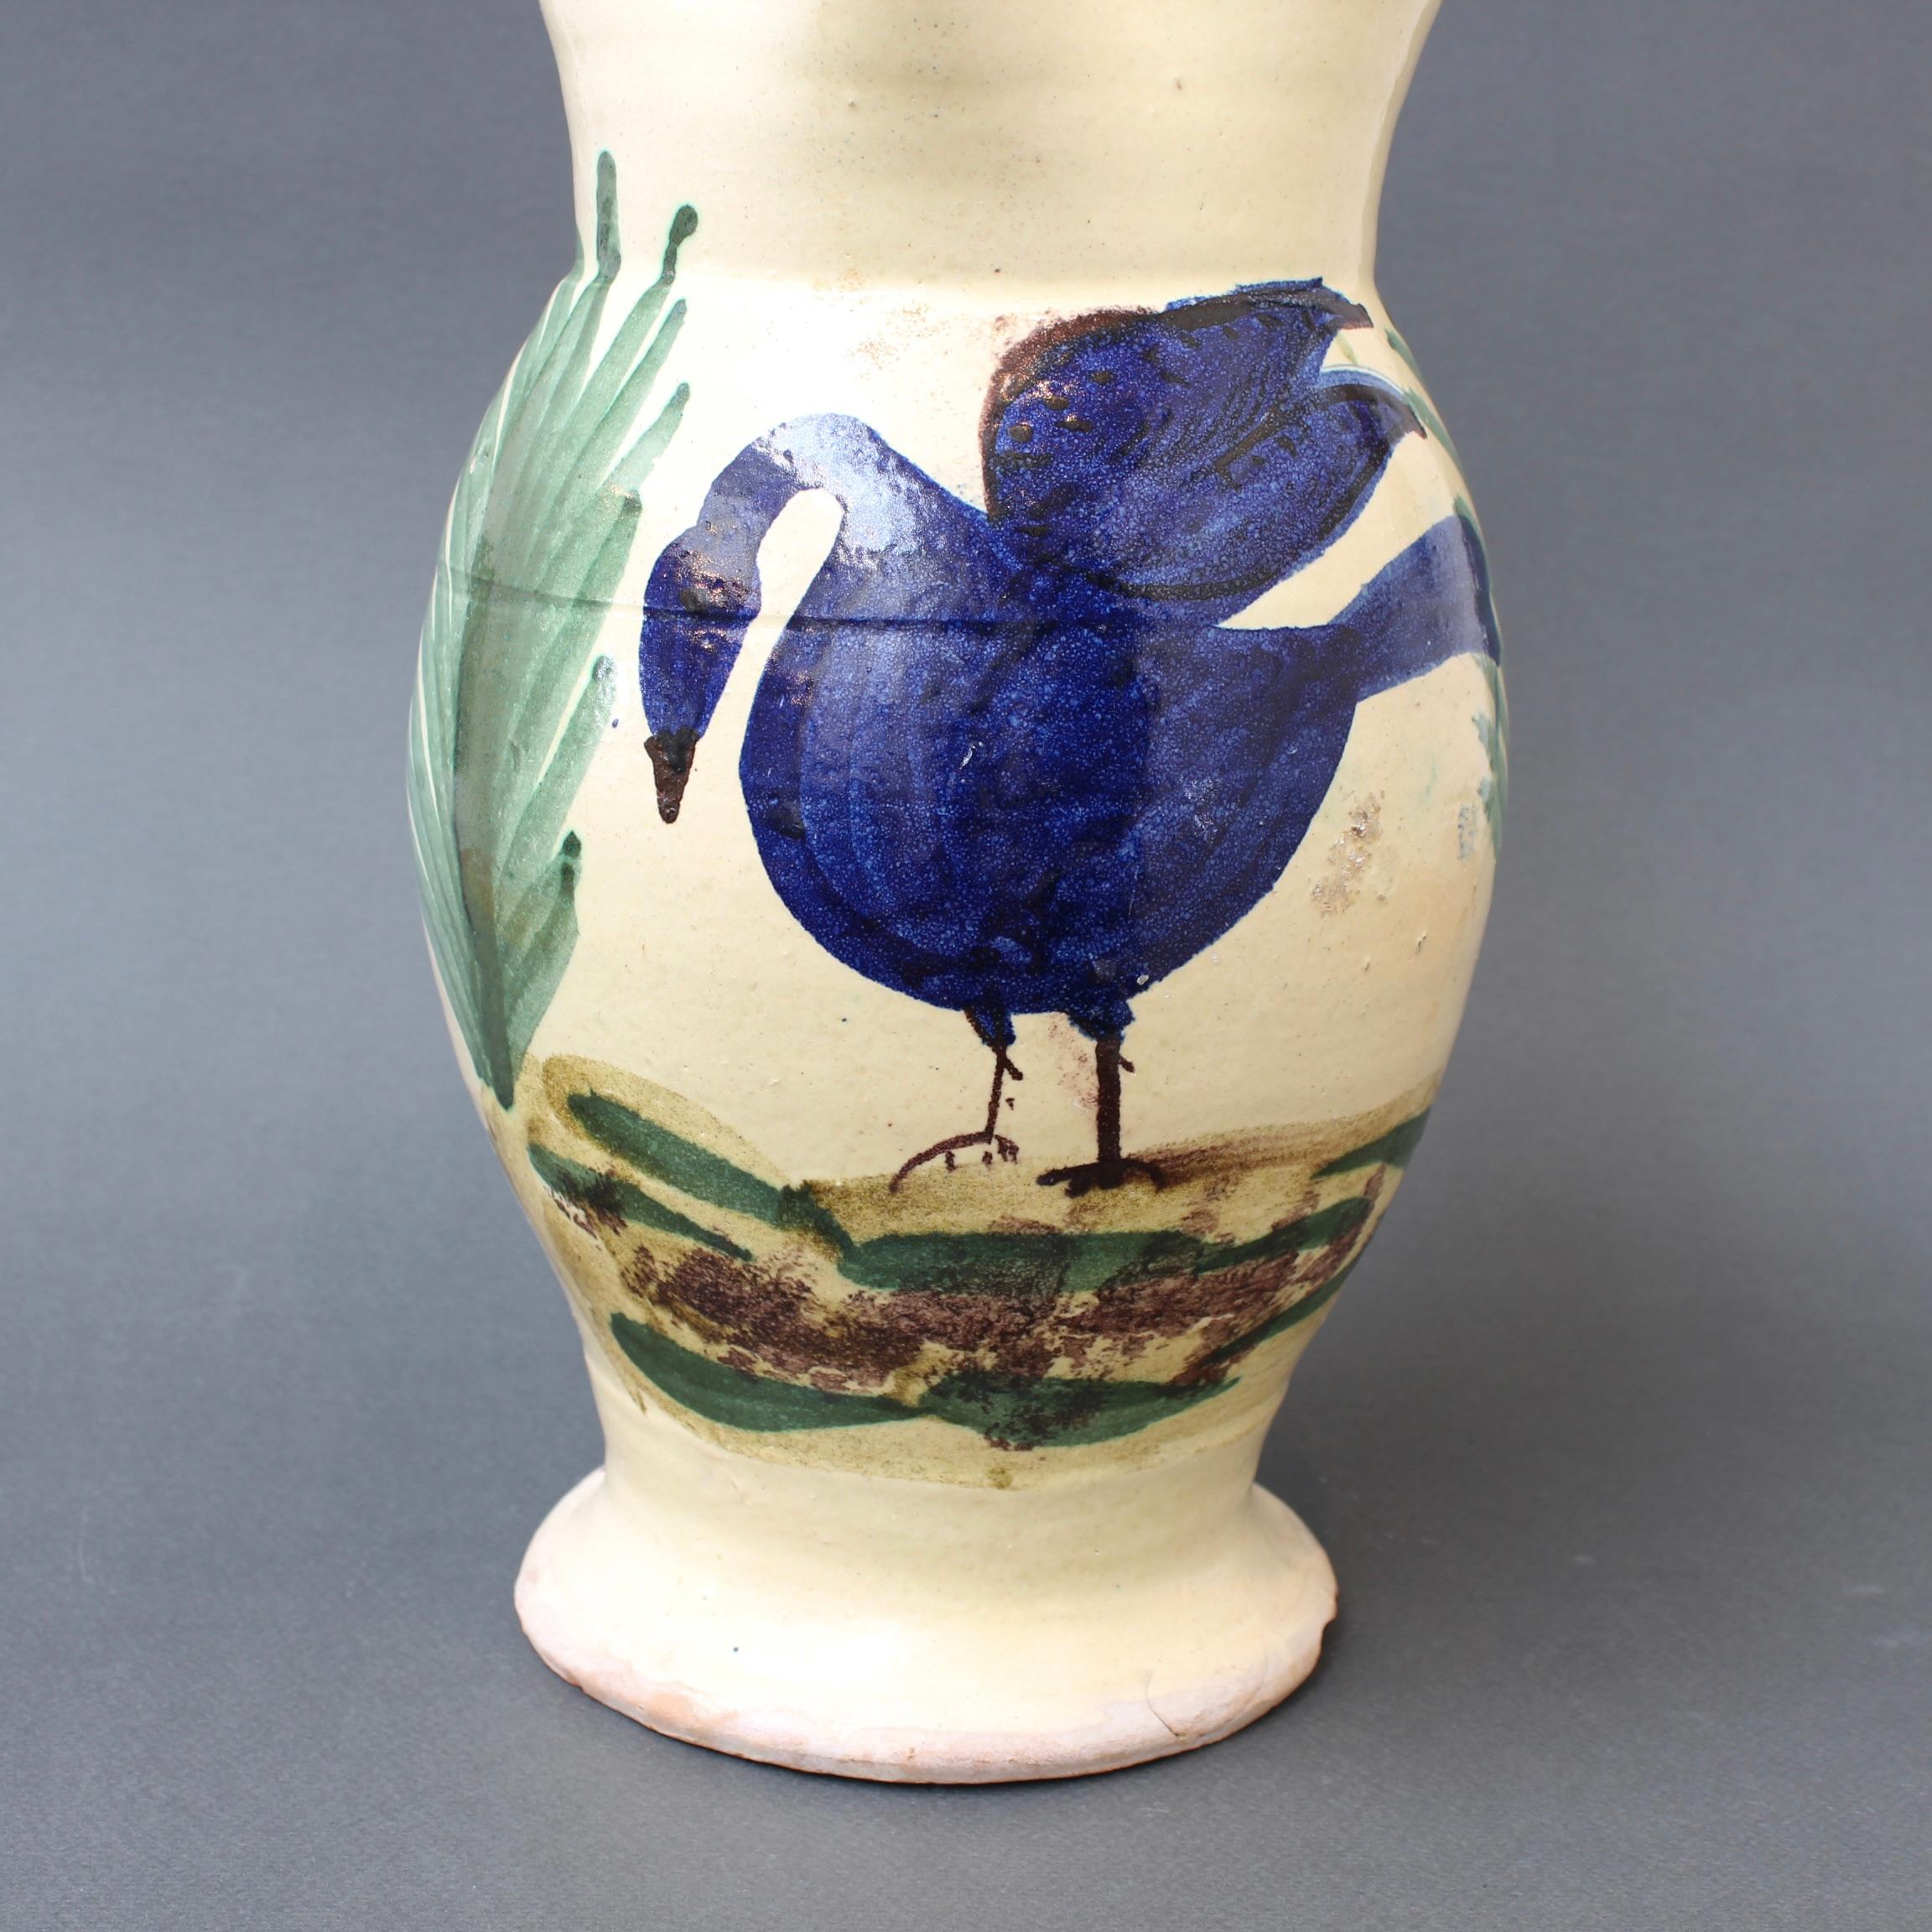 Antique Pugliese Ceramic Water Pitcher (circa 1890s) In Fair Condition For Sale In London, GB